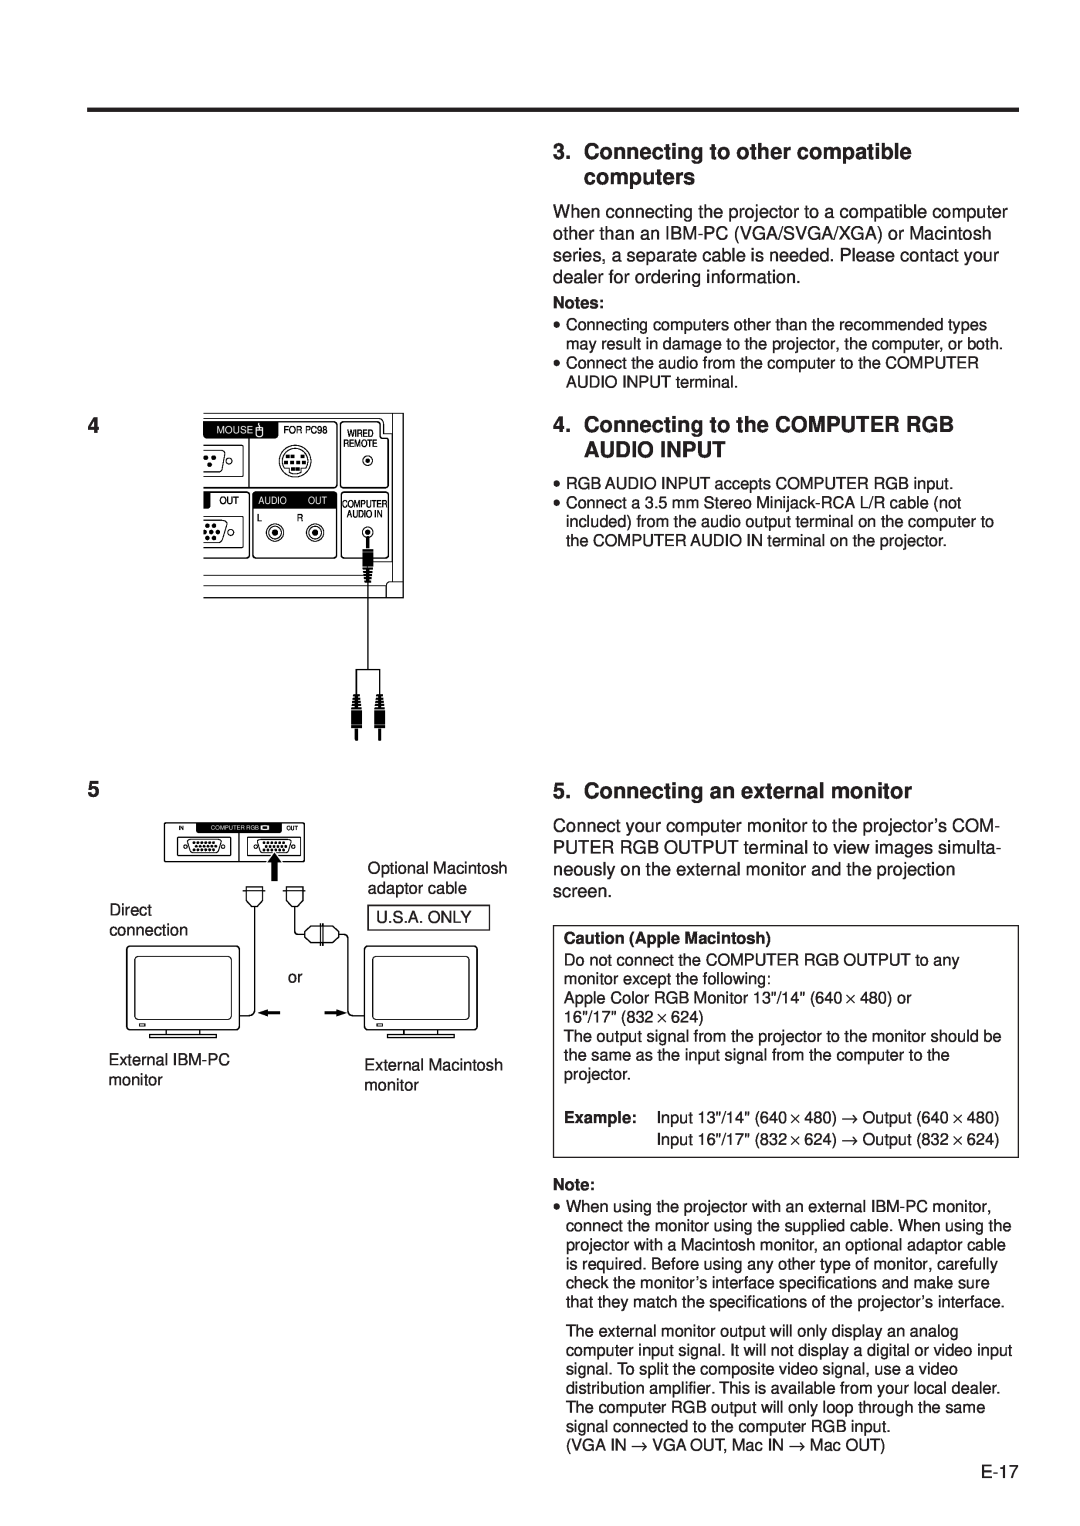 Sharp PG-D100U operation manual Connecting to other compatible computers, Connecting to the COMPUTER RGB AUDIO INPUT 